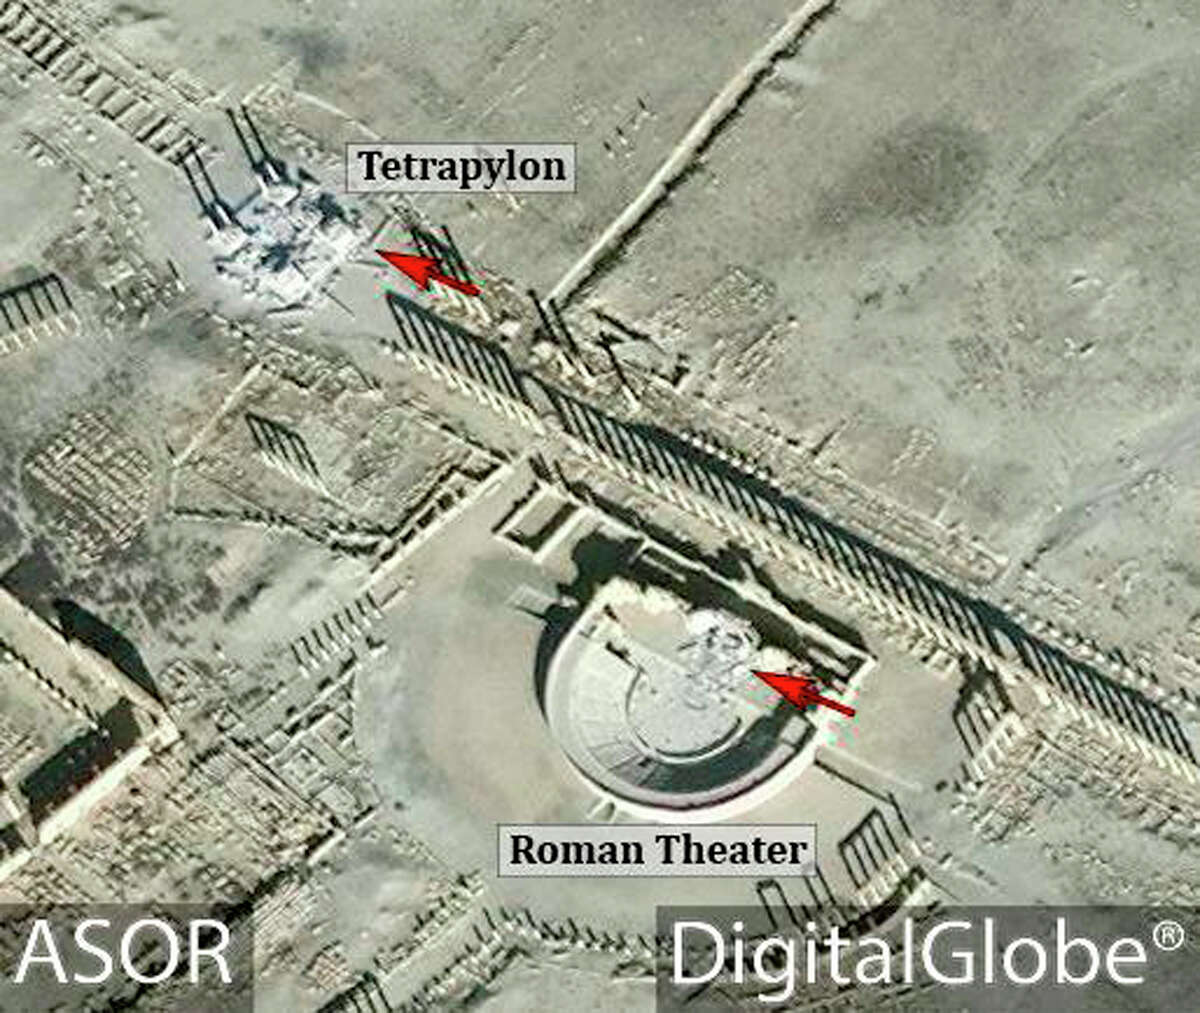 This satellite image released by the American Schools of Oriental Research (ASOR) on Friday, Jan. 20, 2017 as captured by DigitalGlobe shows the Roman theater at the UNESCO World Heritage Site of Palmyra, Syria with red denoting area of new damages on Jan. 10, 2017. Islamic State group militants destroyed a landmark ancient Roman monument and parts of the theater in Syria's historic town of Palmyra, the government and opposition monitoring groups said Friday. (ASOR/ DigitalGlobe via AP)